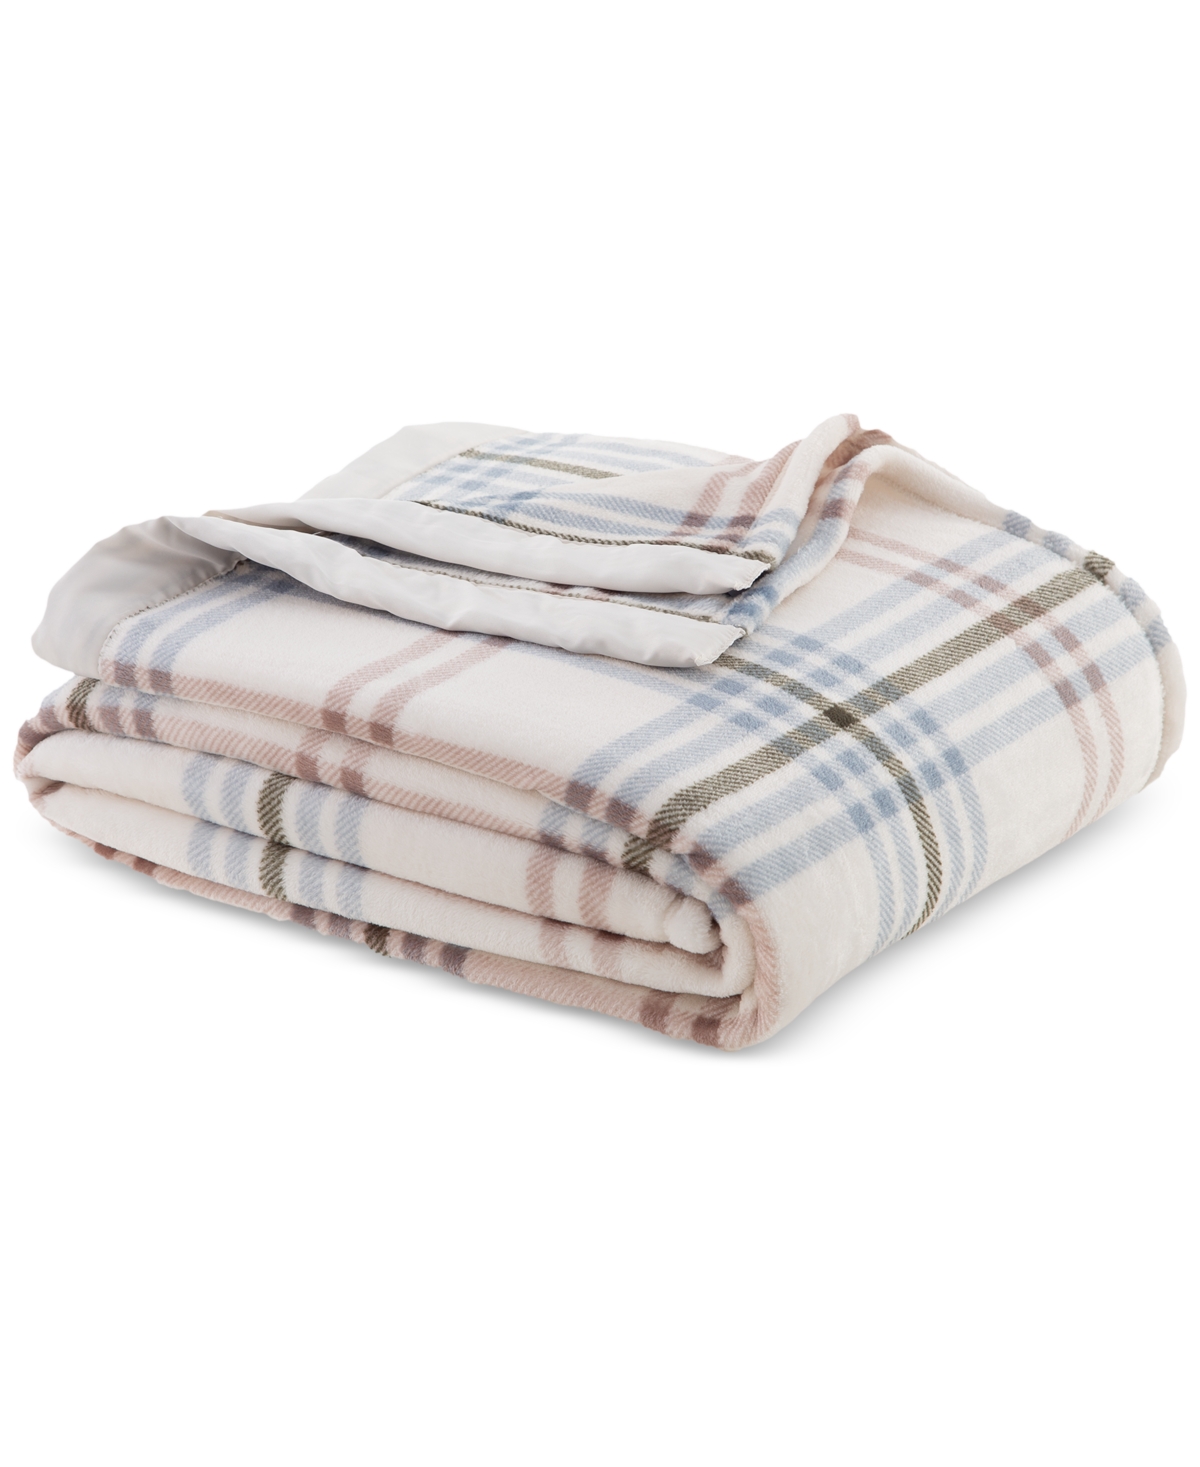 Berkshire Classic Velvety Plush Twin Blanket, Created For Macy's In Blue Plaid